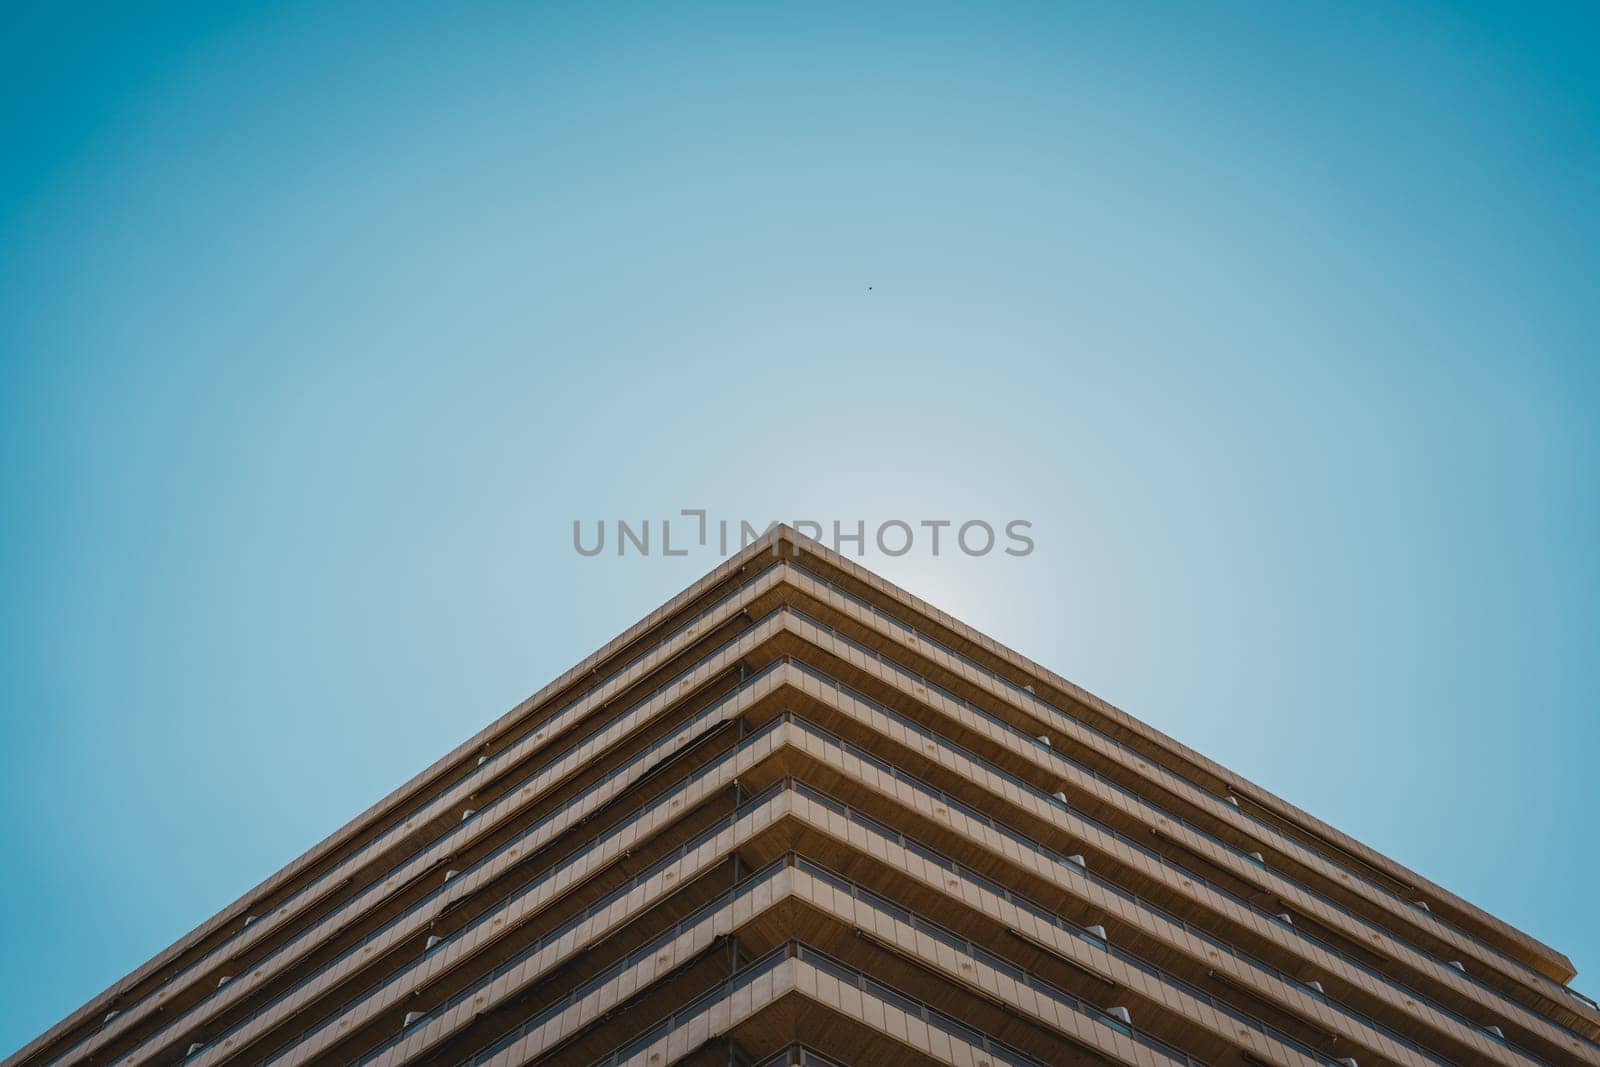 Unique perspective of a building s corner facade with balconies, set against a clear sky. Sant Antoni beach, Cullera, Spain